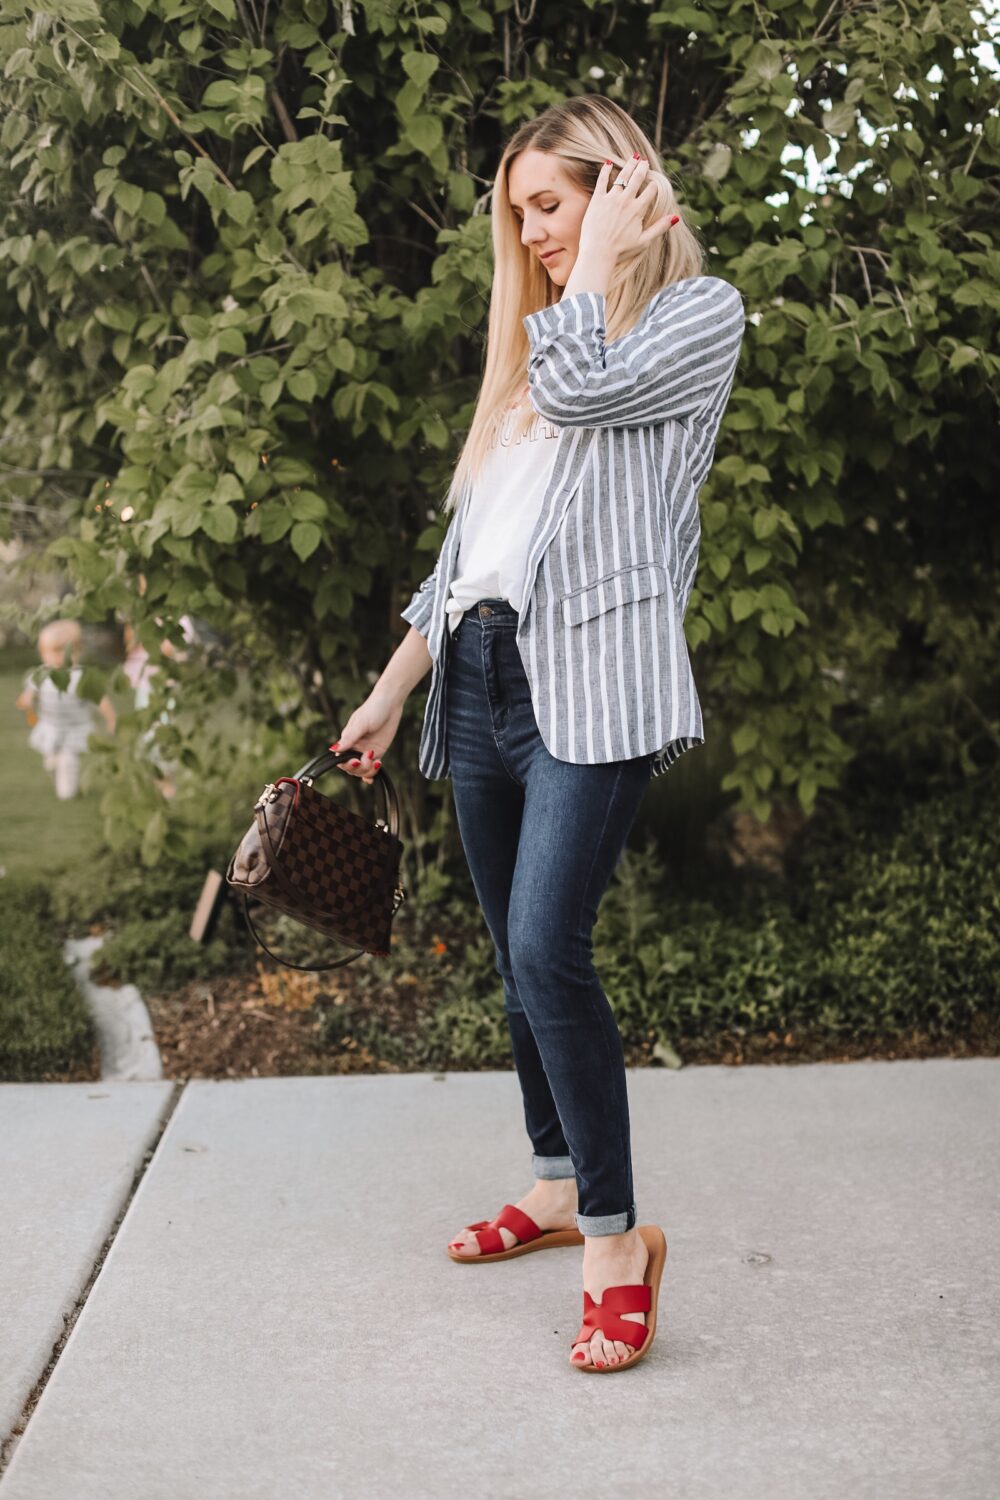 4th of July outfit inspiration (part 3) - Stripes in Bloom